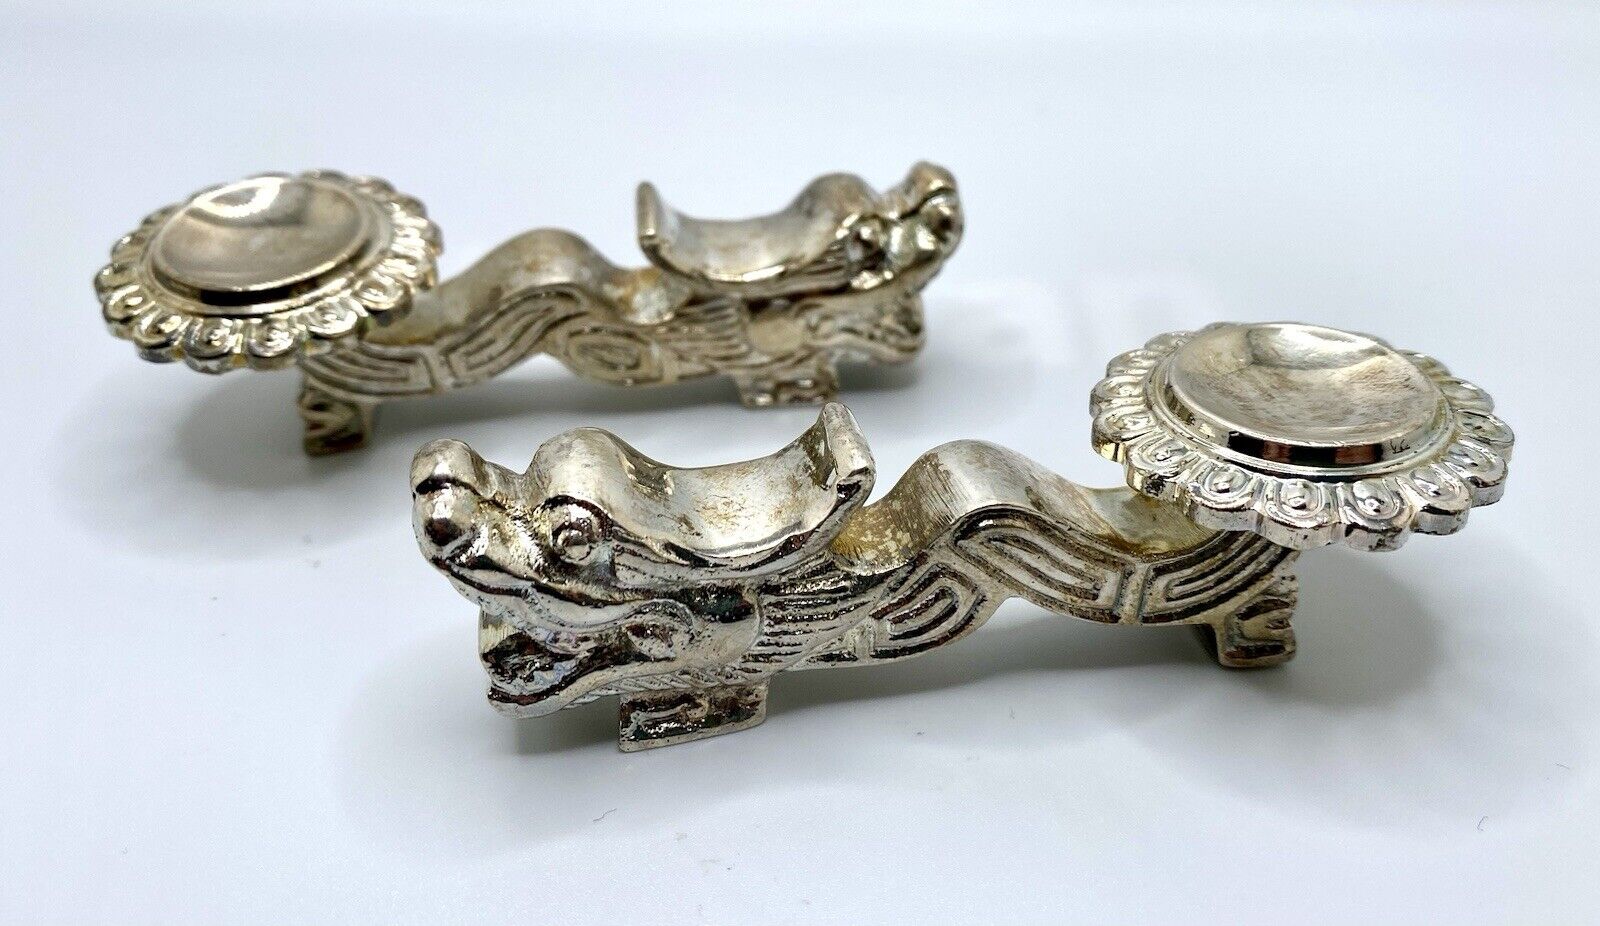 Vintage Chinese Dragon Set of 2 Silver Plated Brass Chopstick Spoon Holders Rest